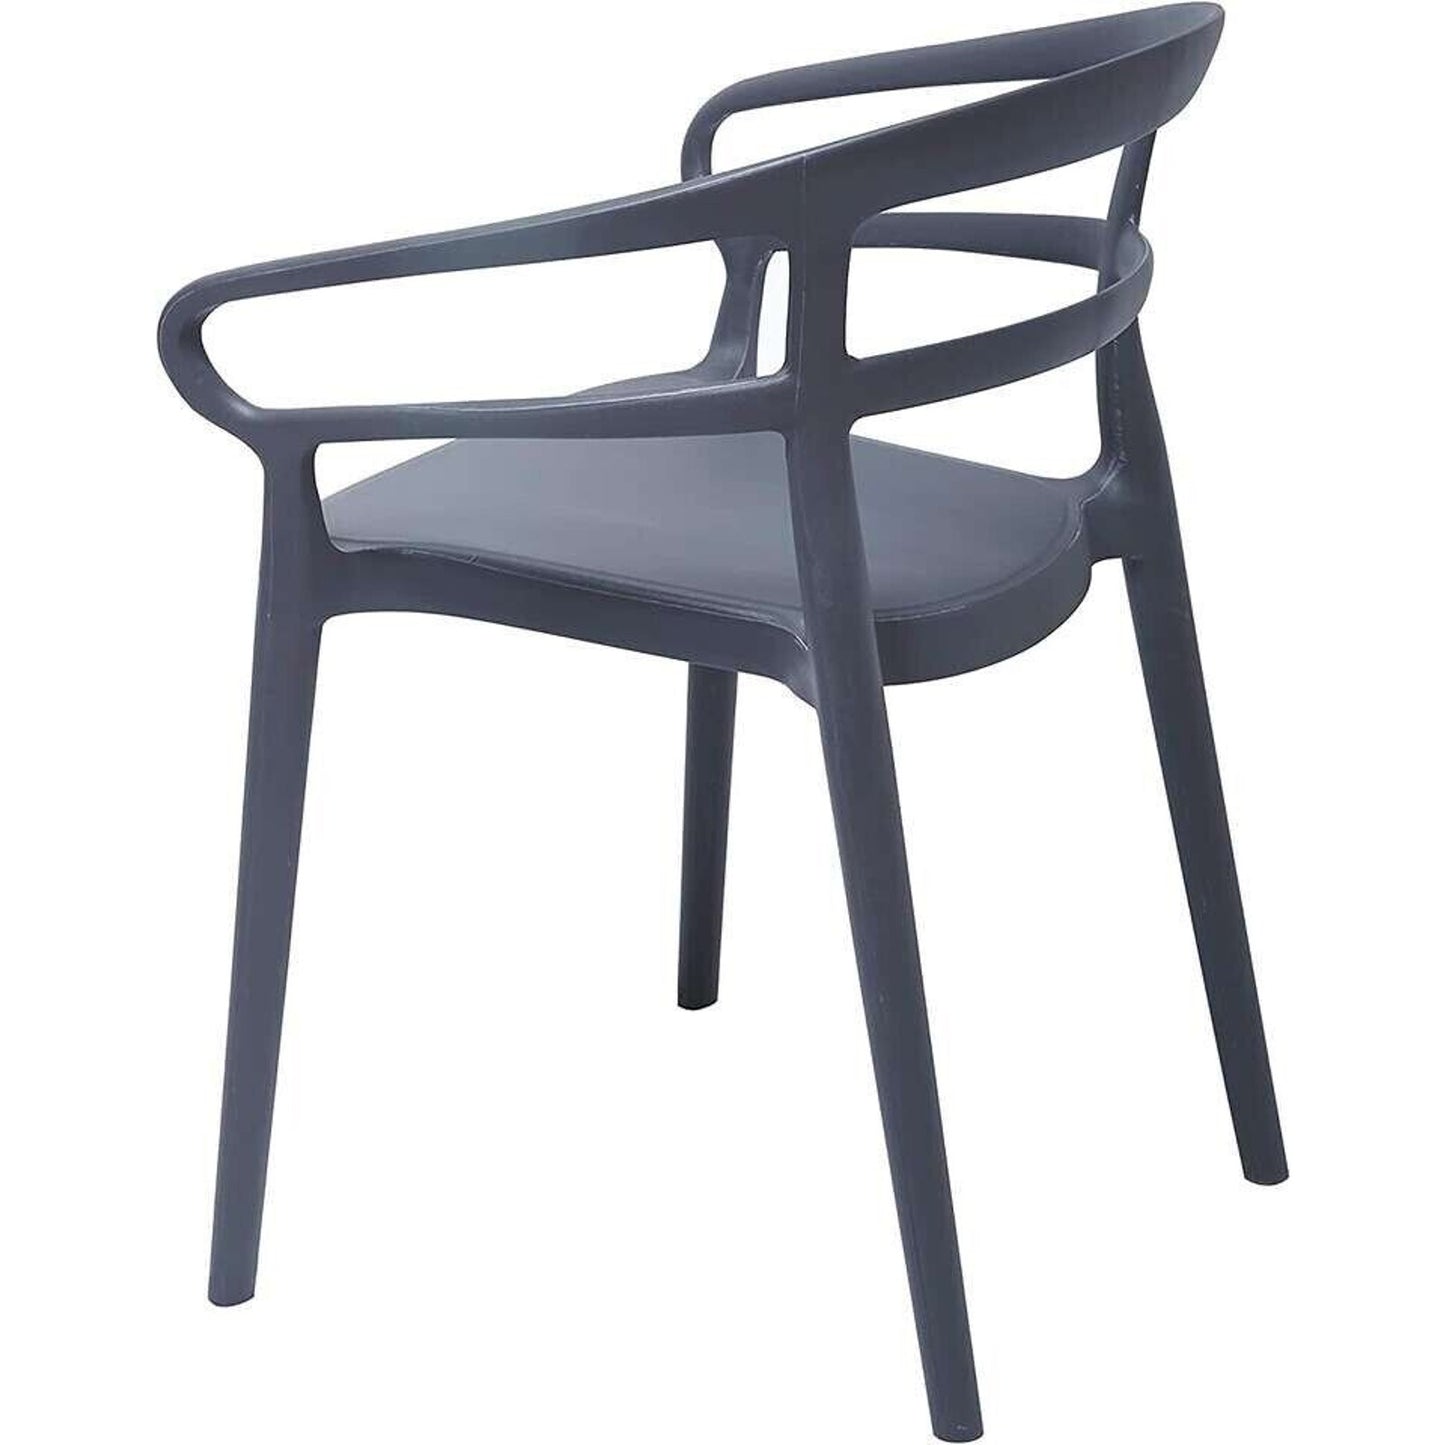 Amazon Basics Curved Back Grey Chairs, 2-Pack, Indoor/Outdoor, Solid Resin Frame